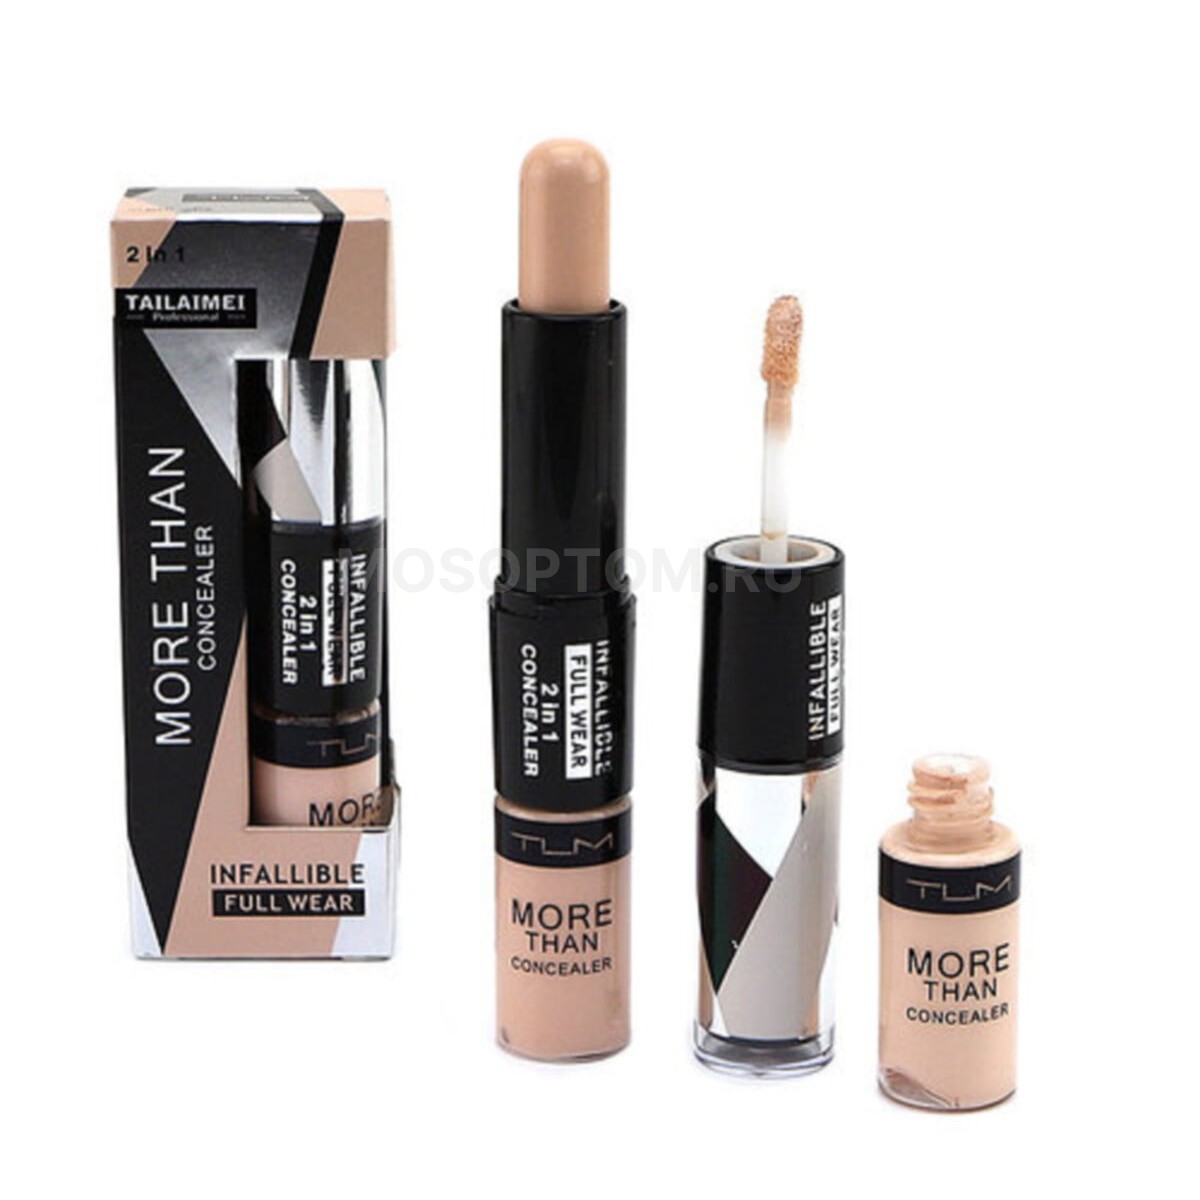 Консилер 2в1 Tailaimei Infallible Full Wear More Than Concealer оптом